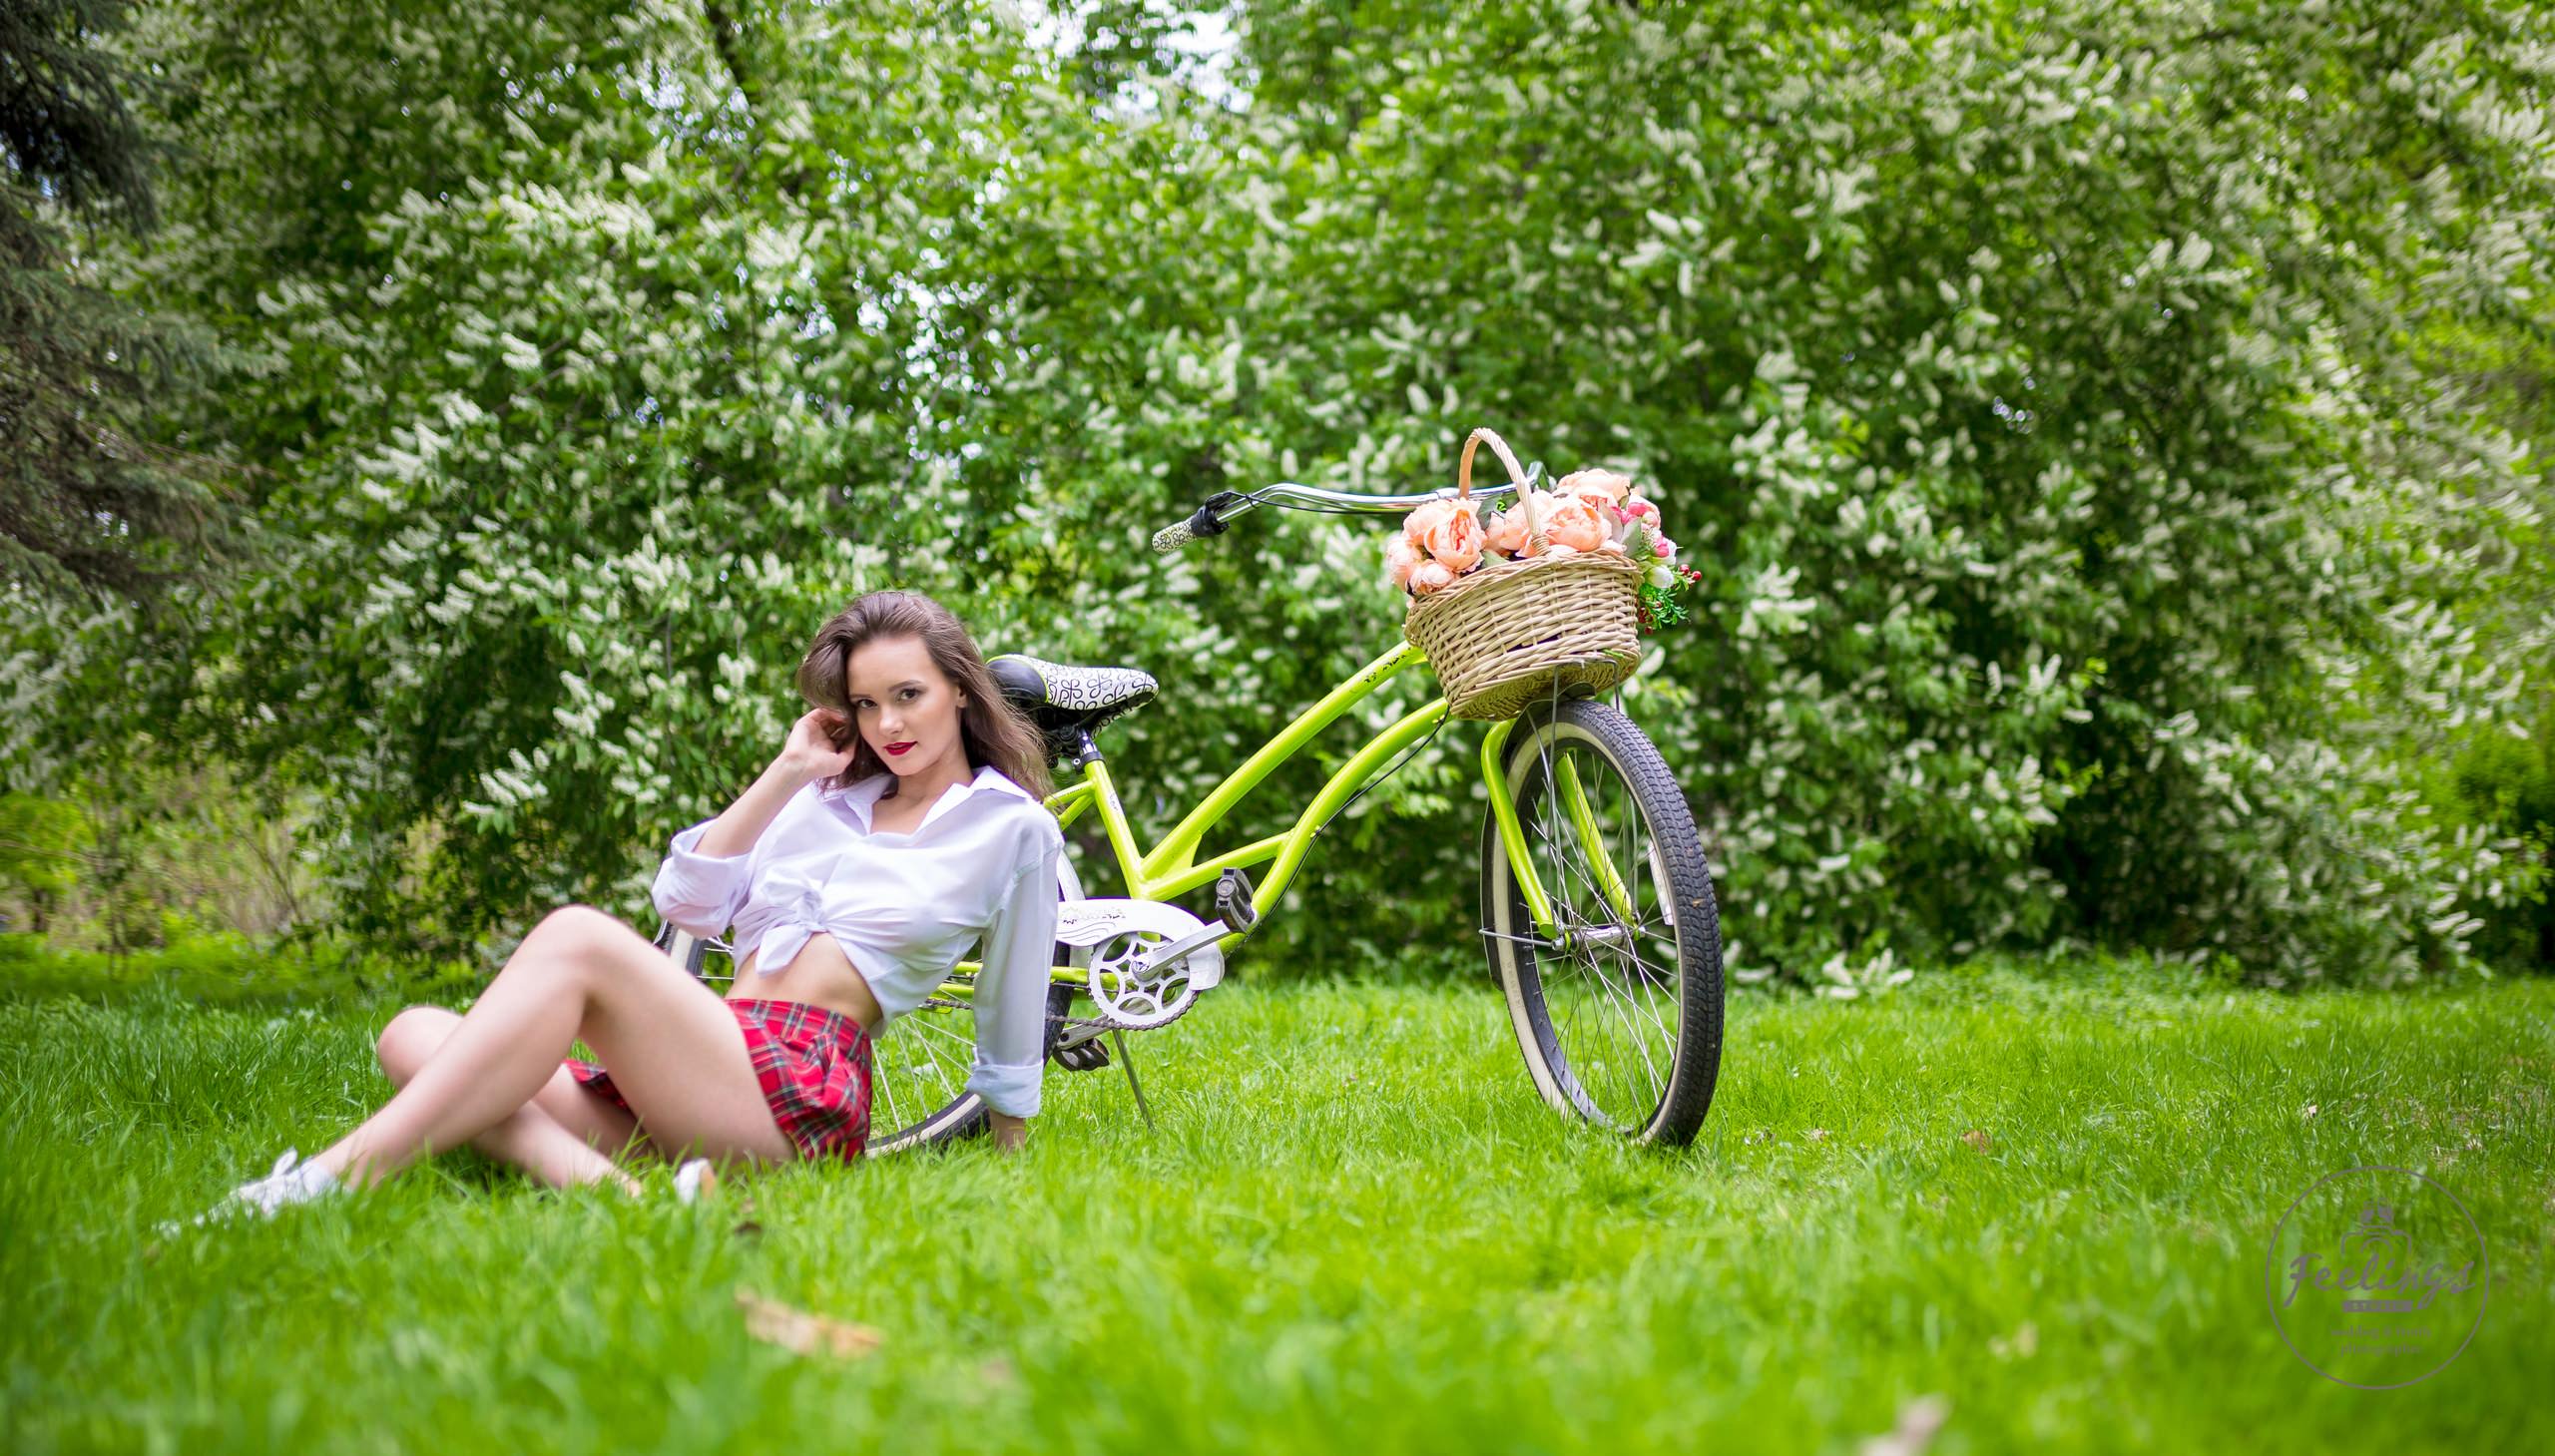 Women Plaid Skirt White Shirt Flowers Women Outdoors Women With Bicycles Bicycle Sitting Grass Red L 2560x1459